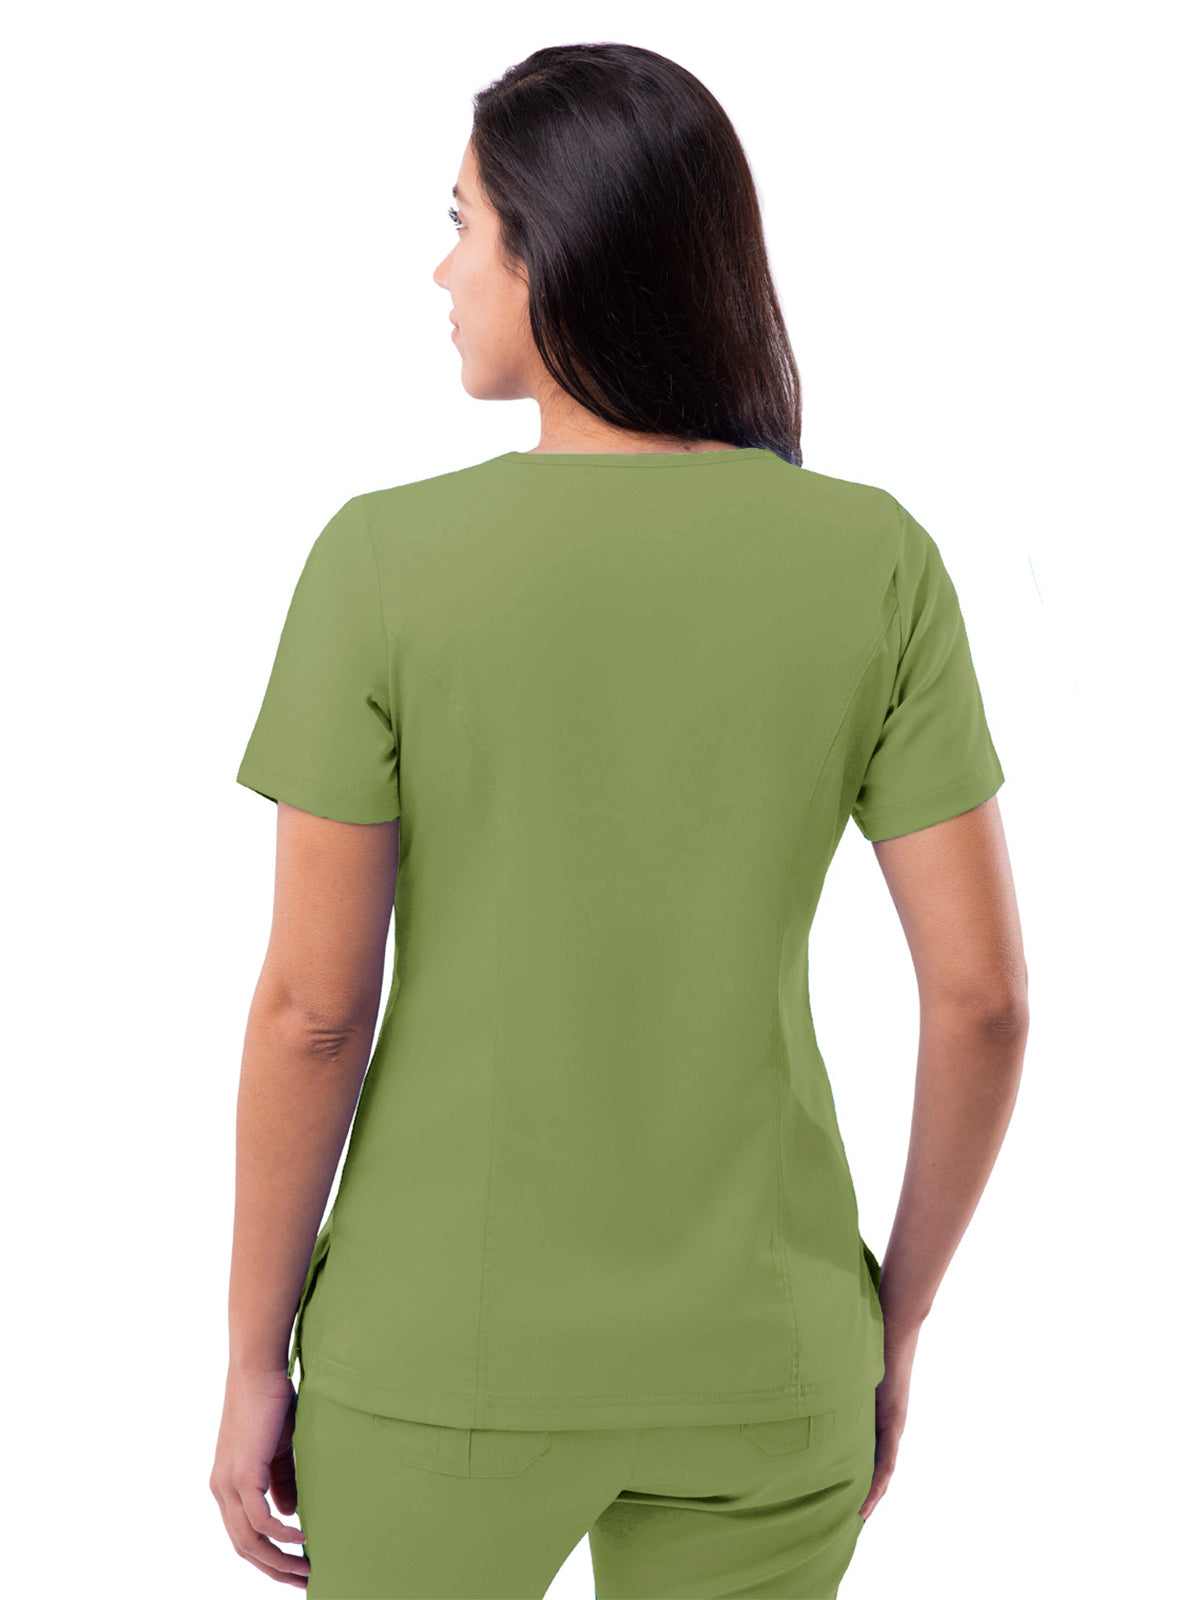 Women's V-Neck Elevated Top